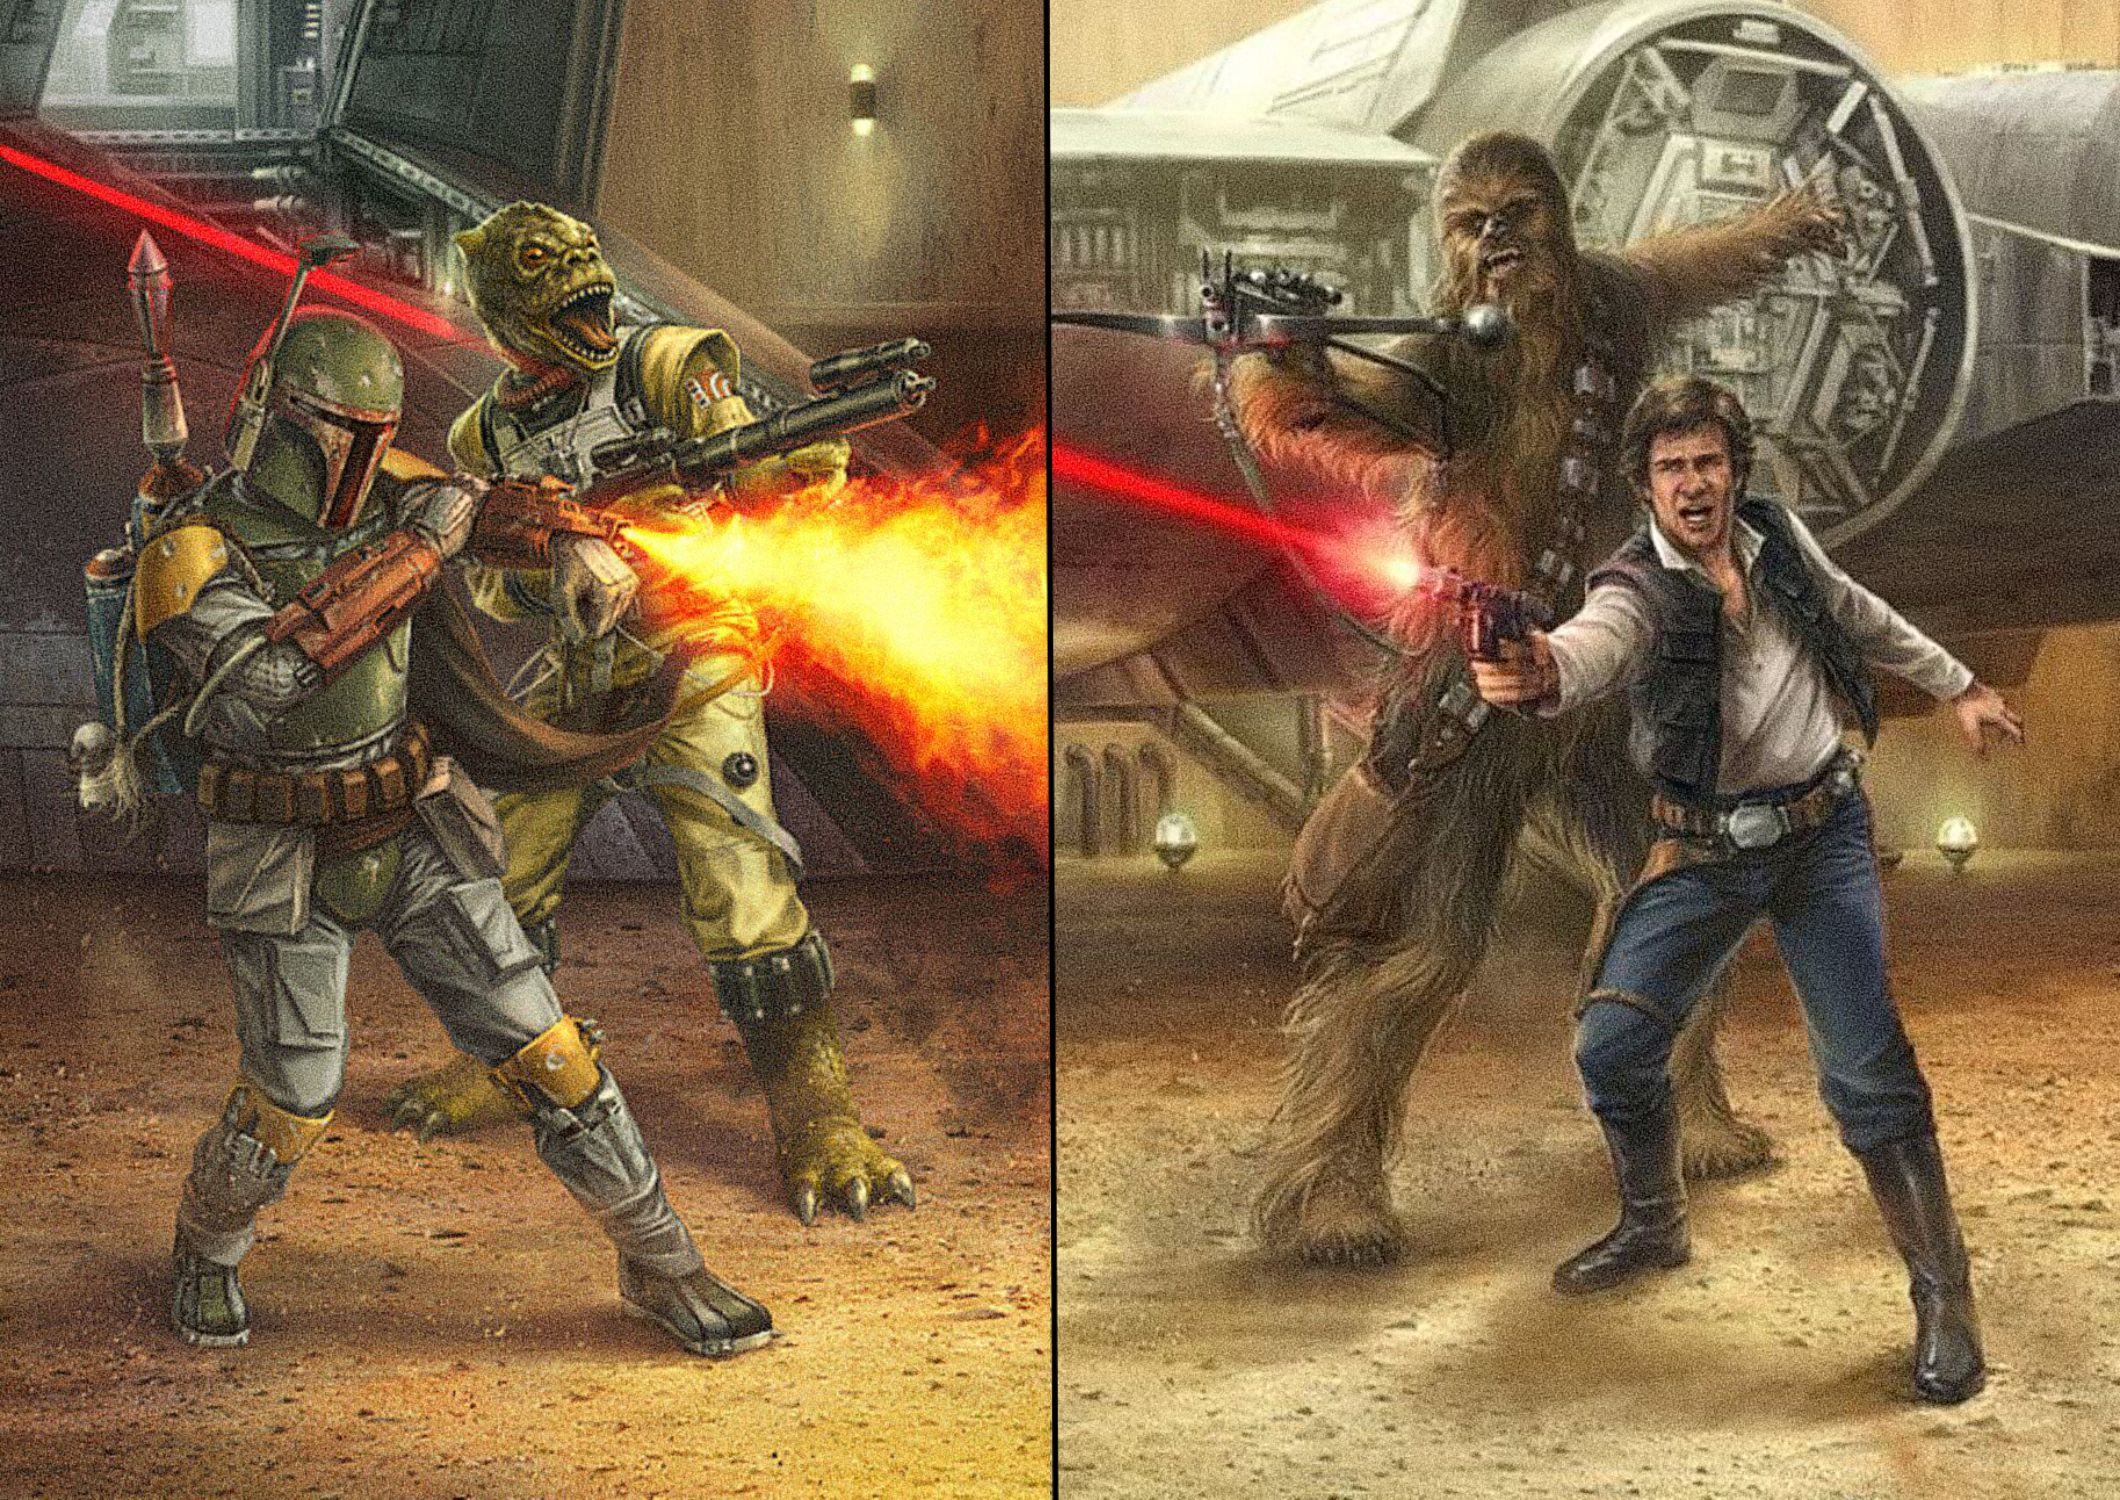 Chewbacca vs. Bossk: Which Star Wars Powerhouse Would Win in A Fight?